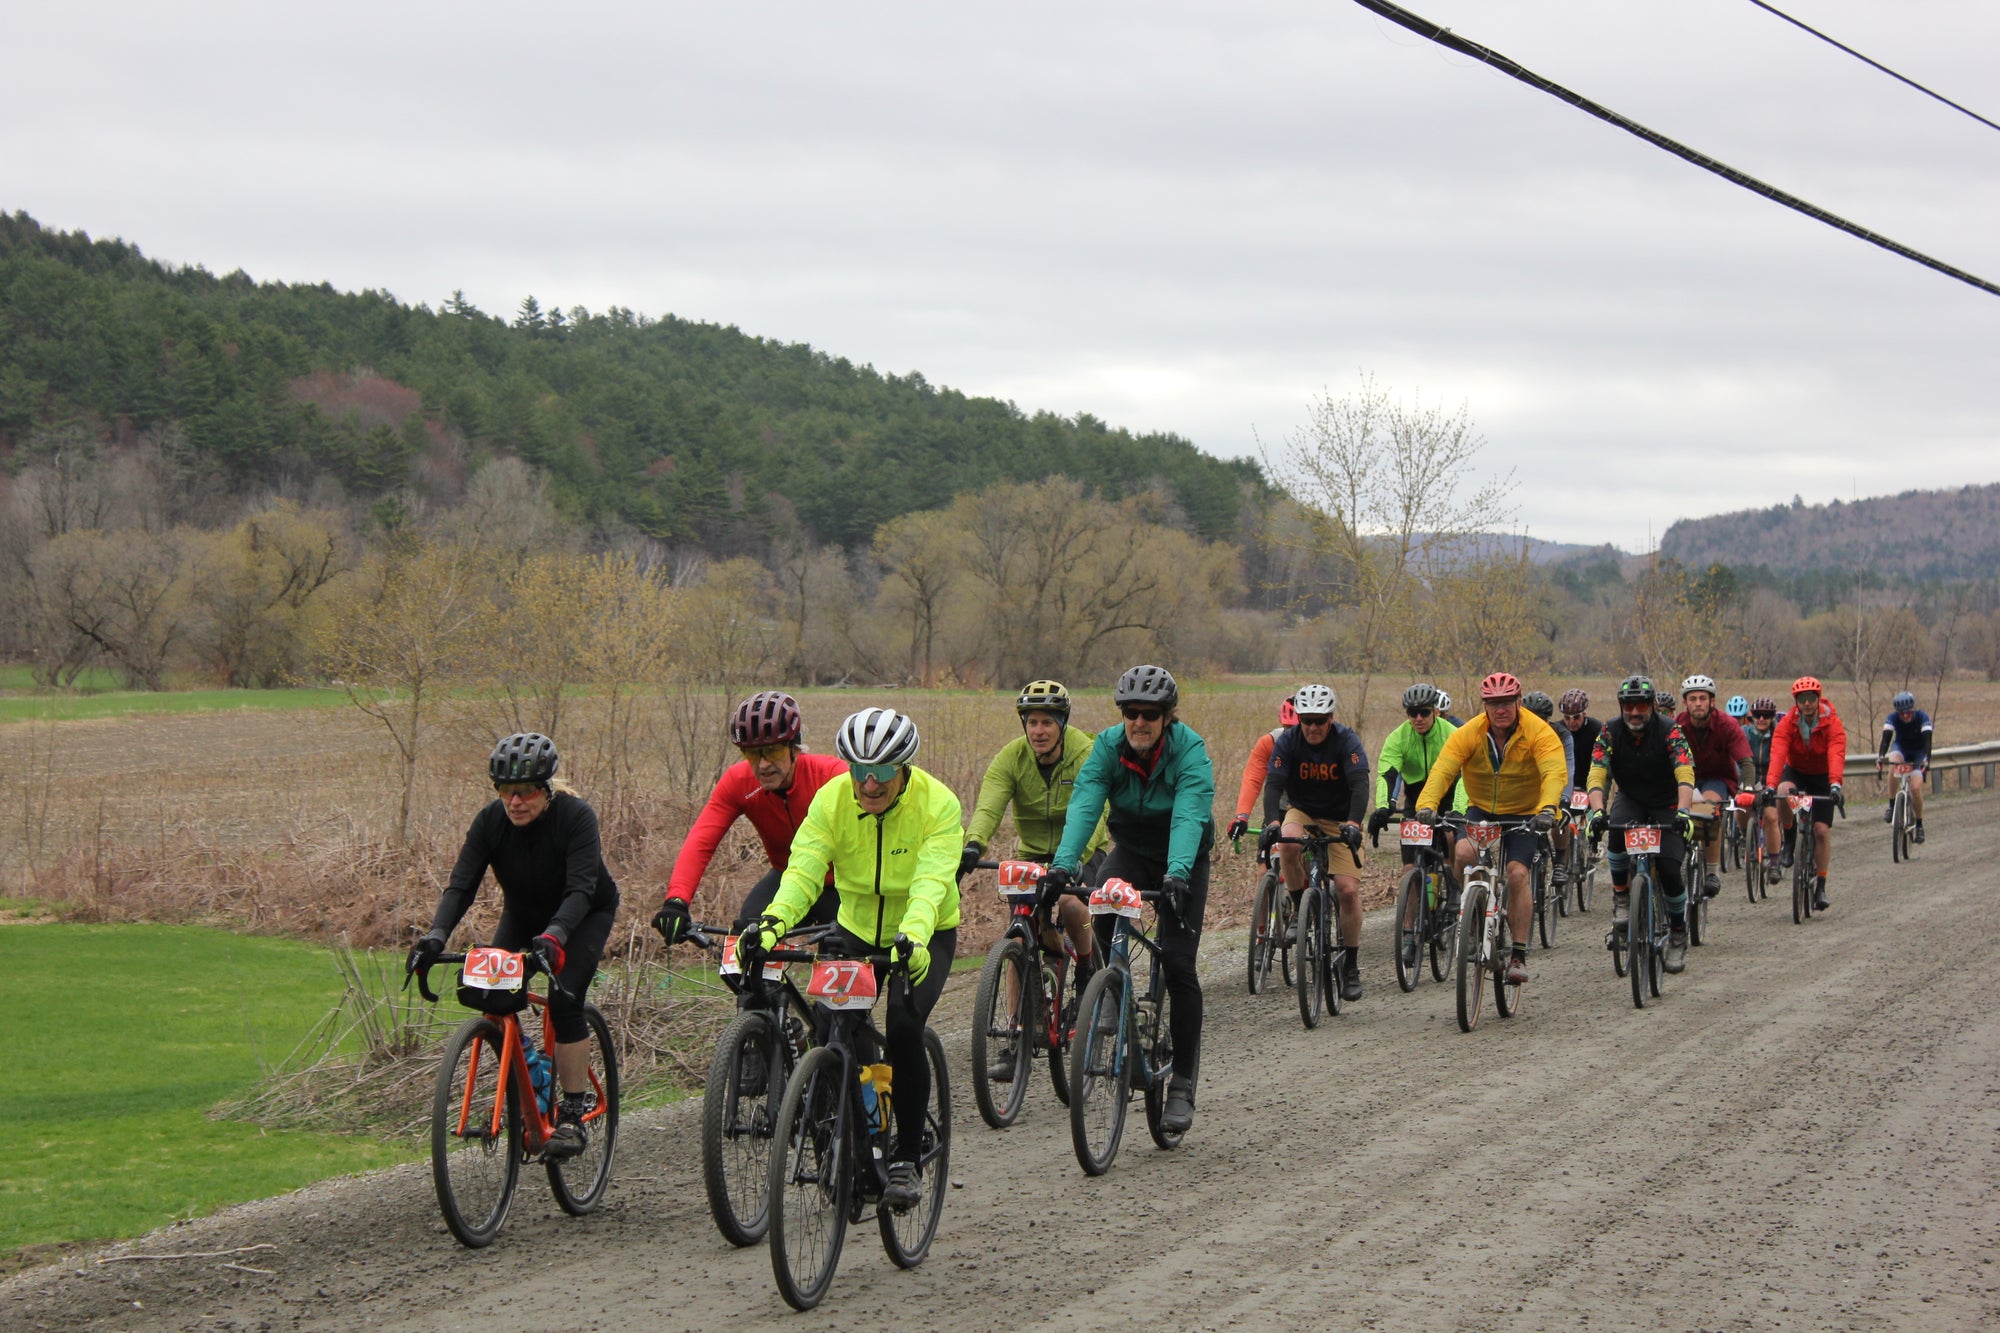 A large group of cyclists in bright colors riding a gravel road